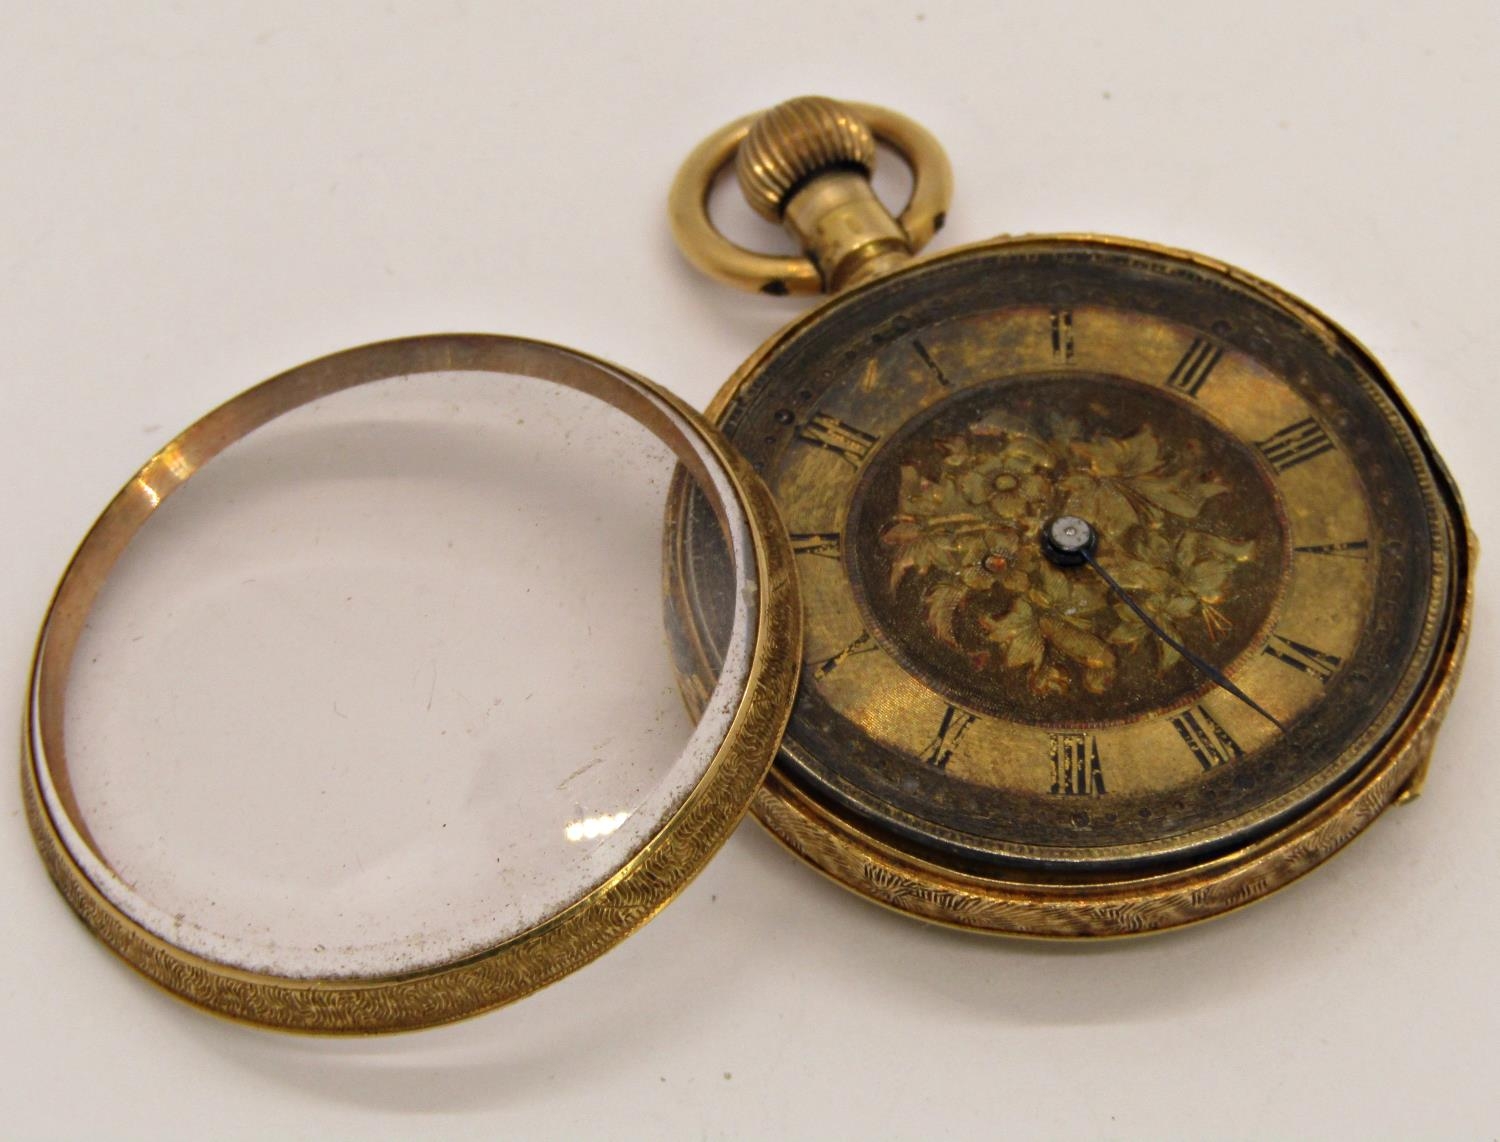 A 19th century continental fob watch with 18k engraved casework and chased dial - Image 2 of 5